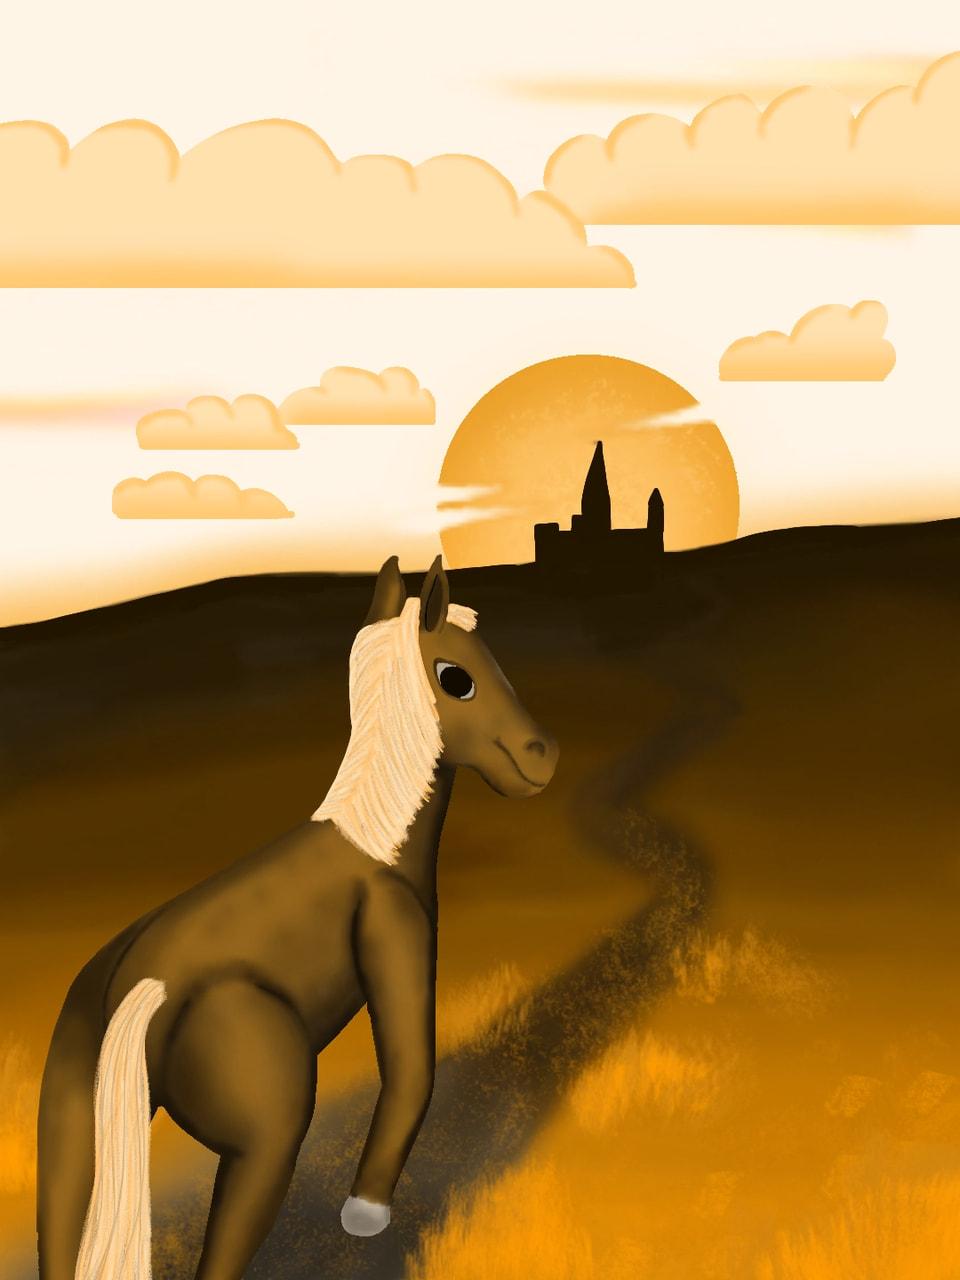 Orange horse, orange sun🍊🐴🌞 This challenge definitly pushed me out of my comfort Zone, but i guess thats the reason for a challenge...I never would have drawn a horse otherwise 🙂 #onecolor #fridayswithsketch #orange #horse #sunset